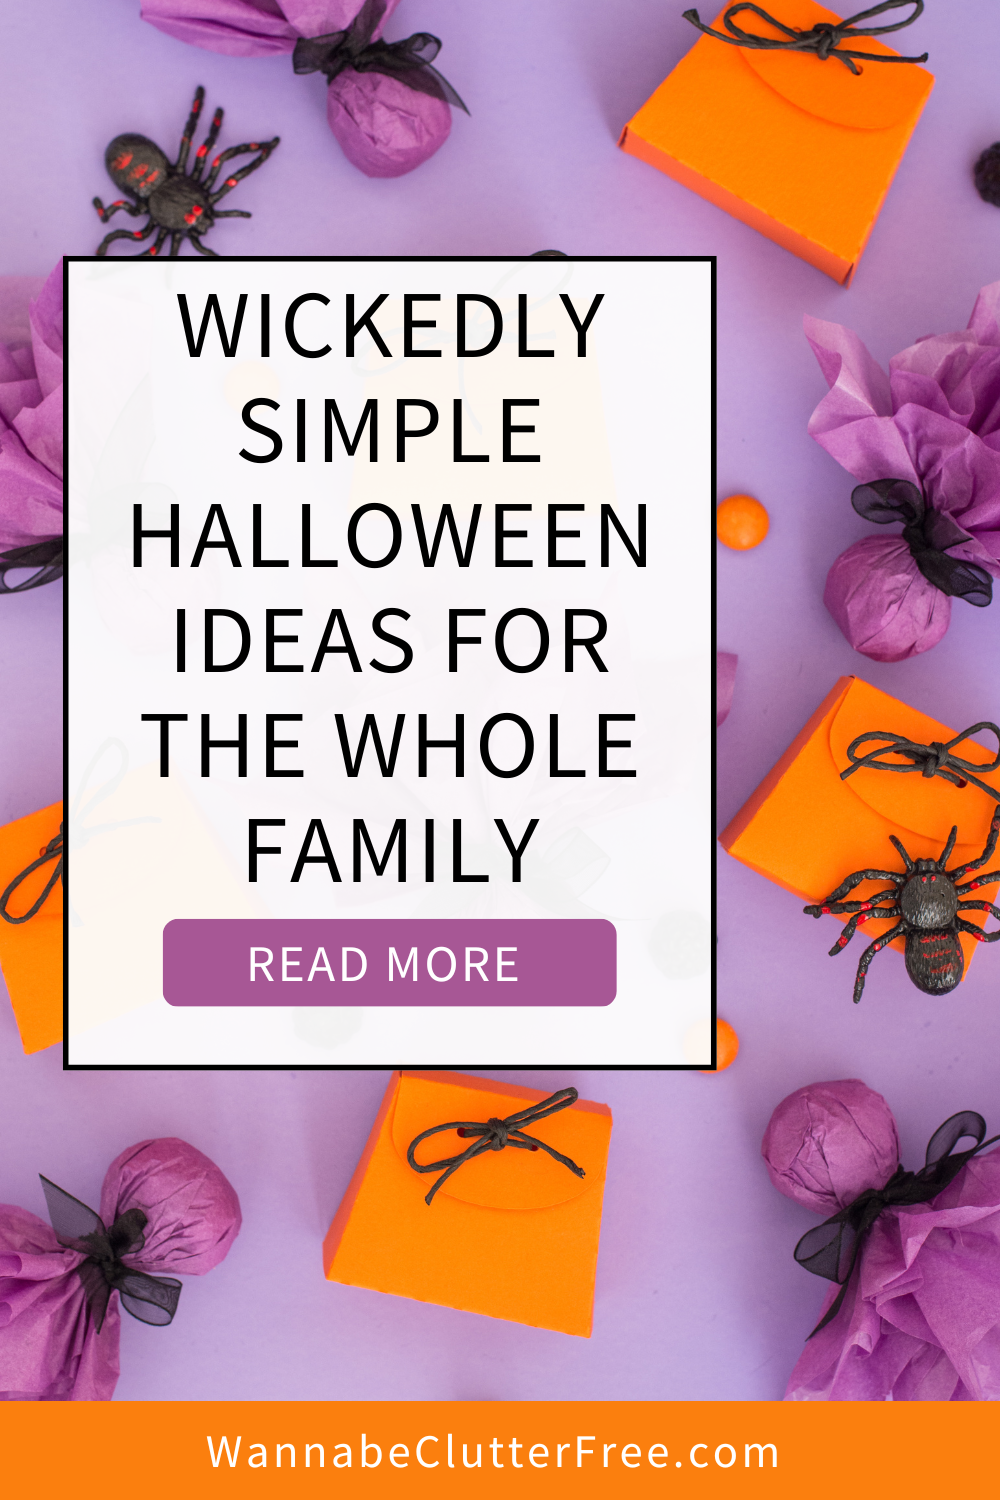 Wickedly Simple Halloween Ideas for the Whole Family